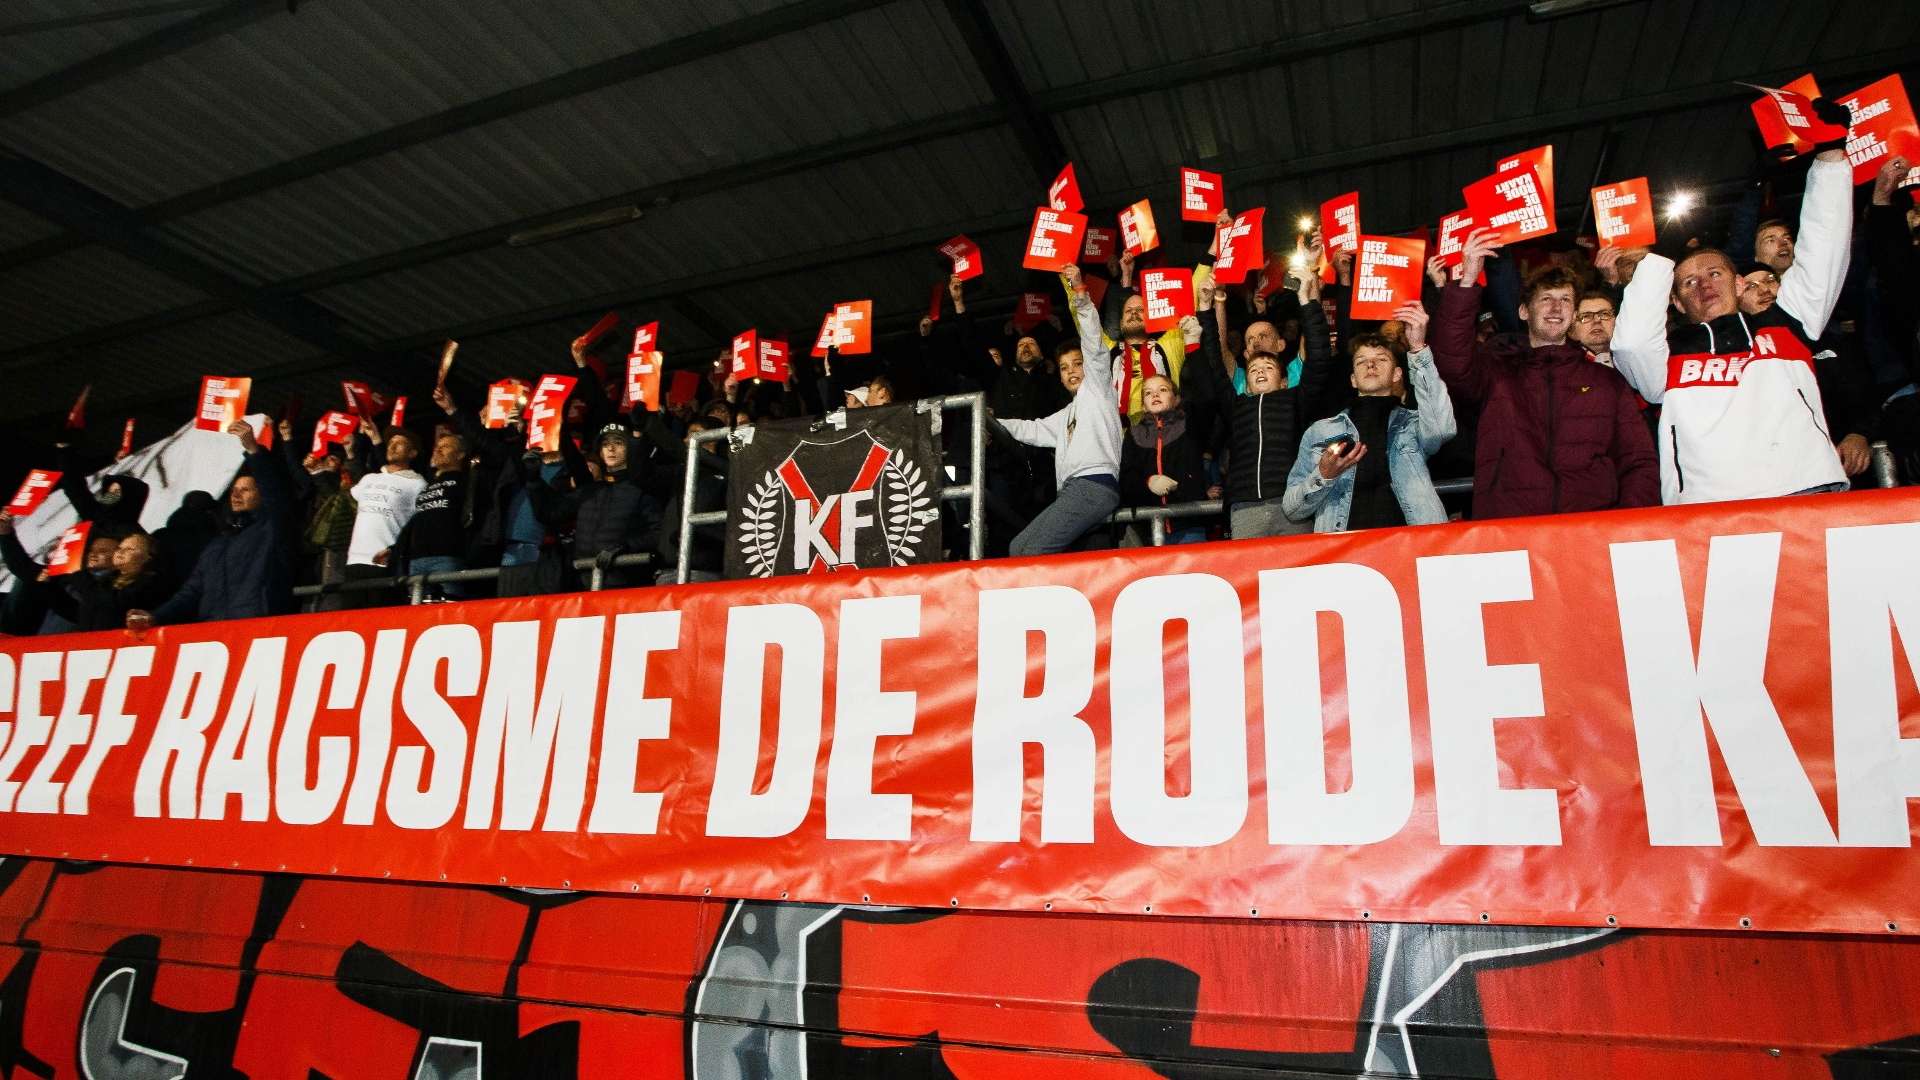 Give Racism The Red Card, Excelsior Rotterdam, November 2019